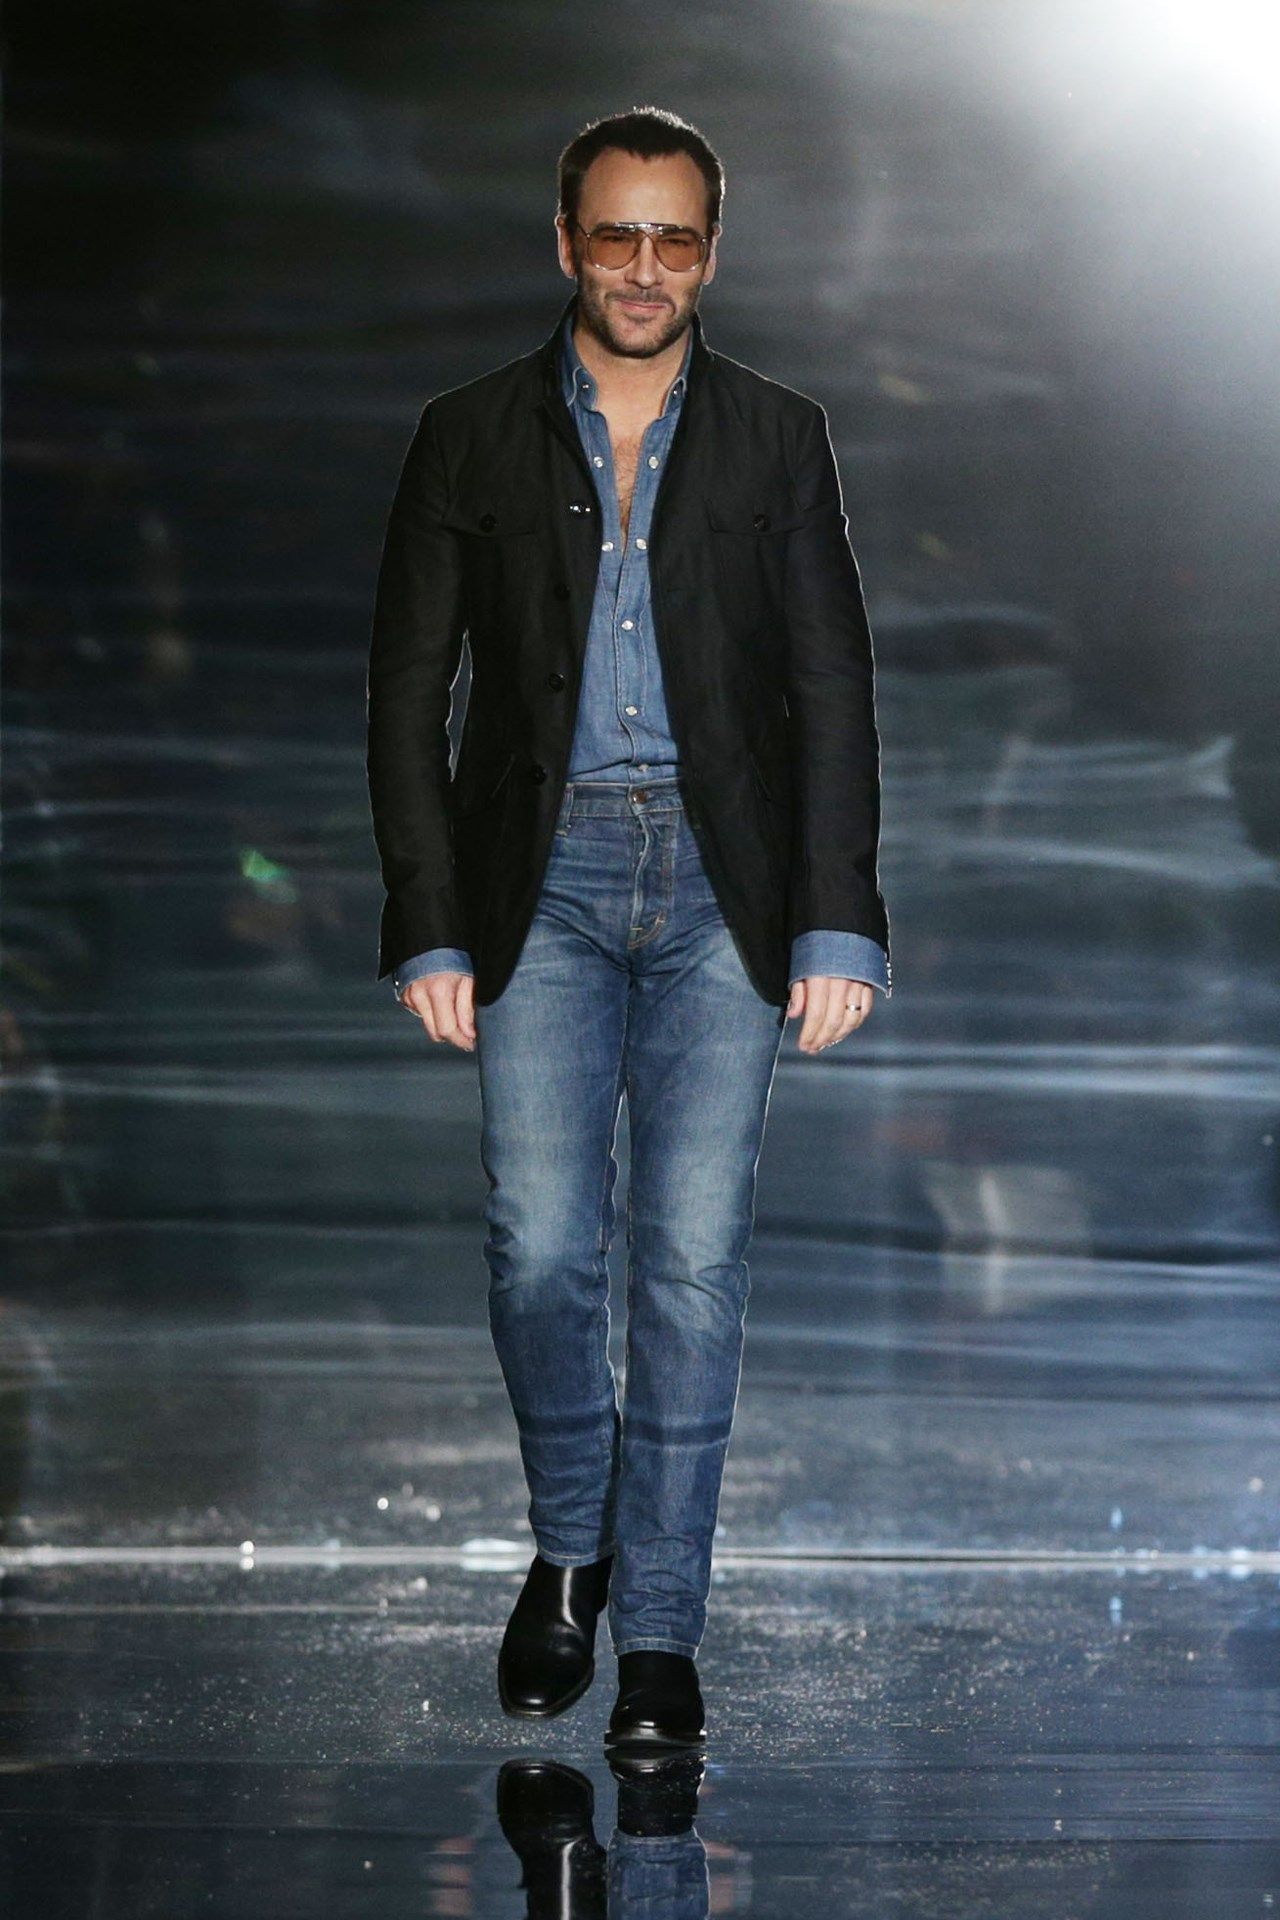 Tom Ford in a blazer, canadian tuxedo, and chelsea boots.